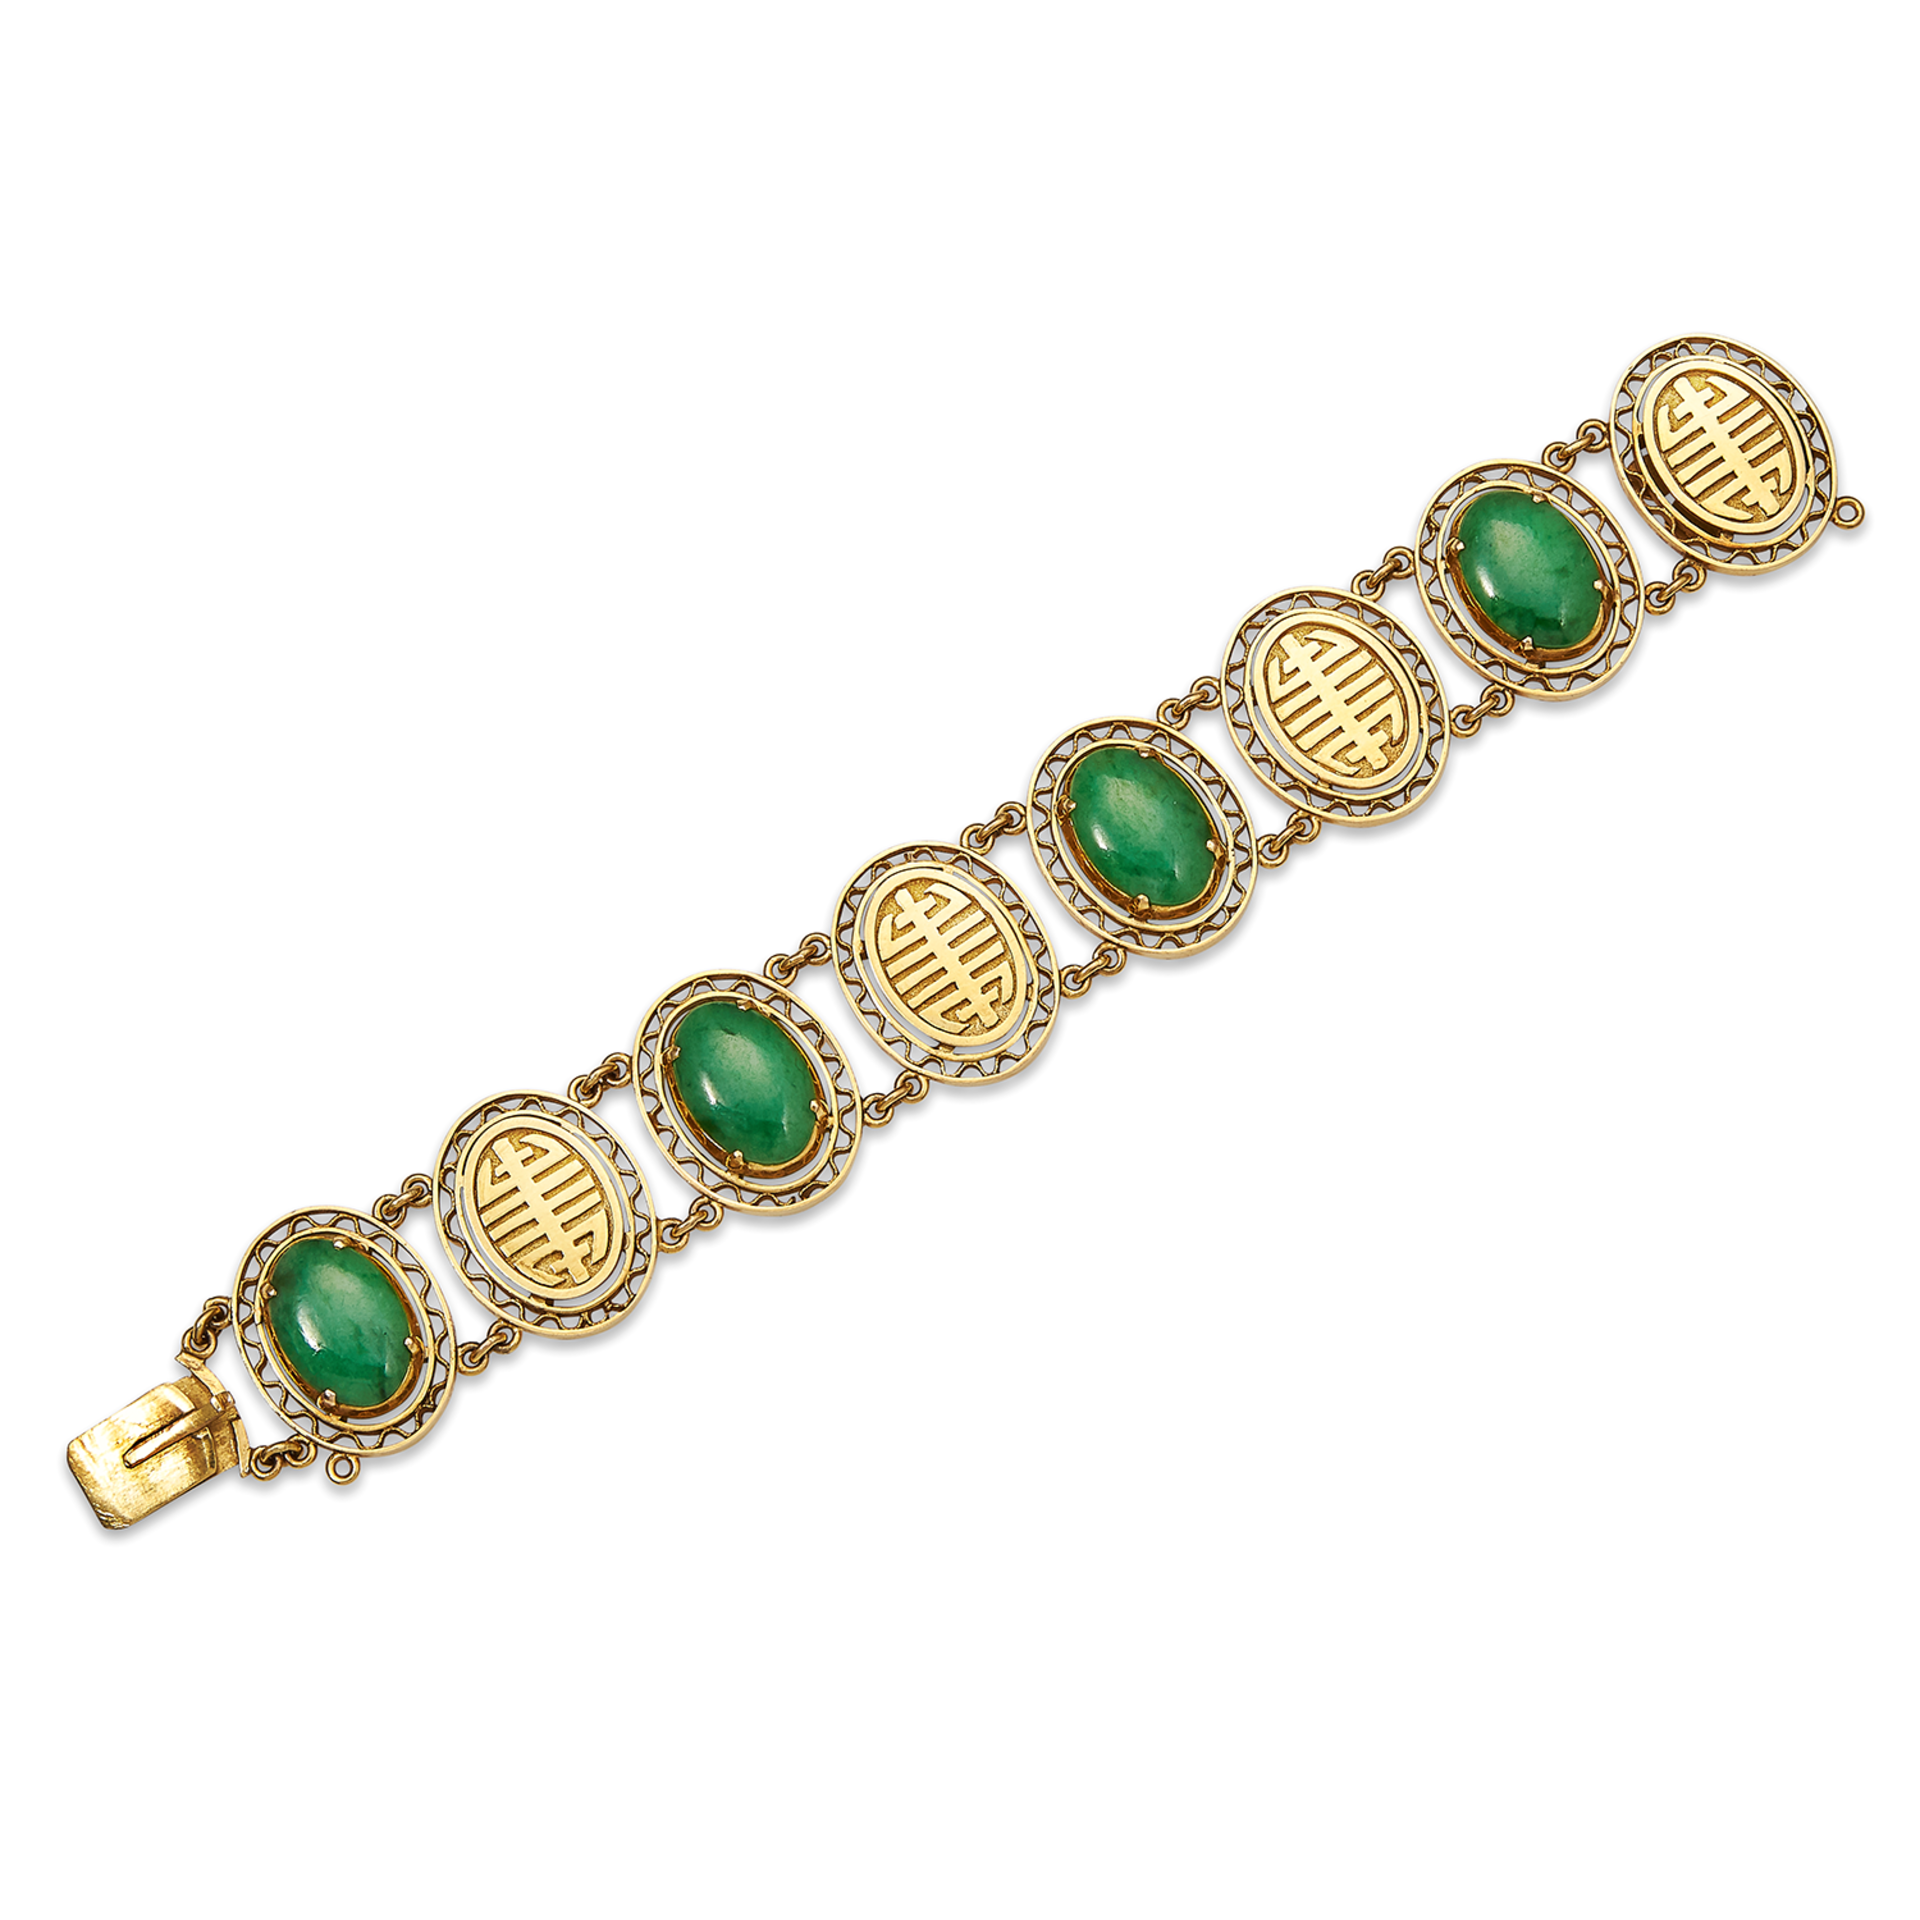 AN ANTIQUE CHINESE JADEITE JADE BRACELET, EARLY-MID 20TH CENTURY in high carat yellow gold, formed